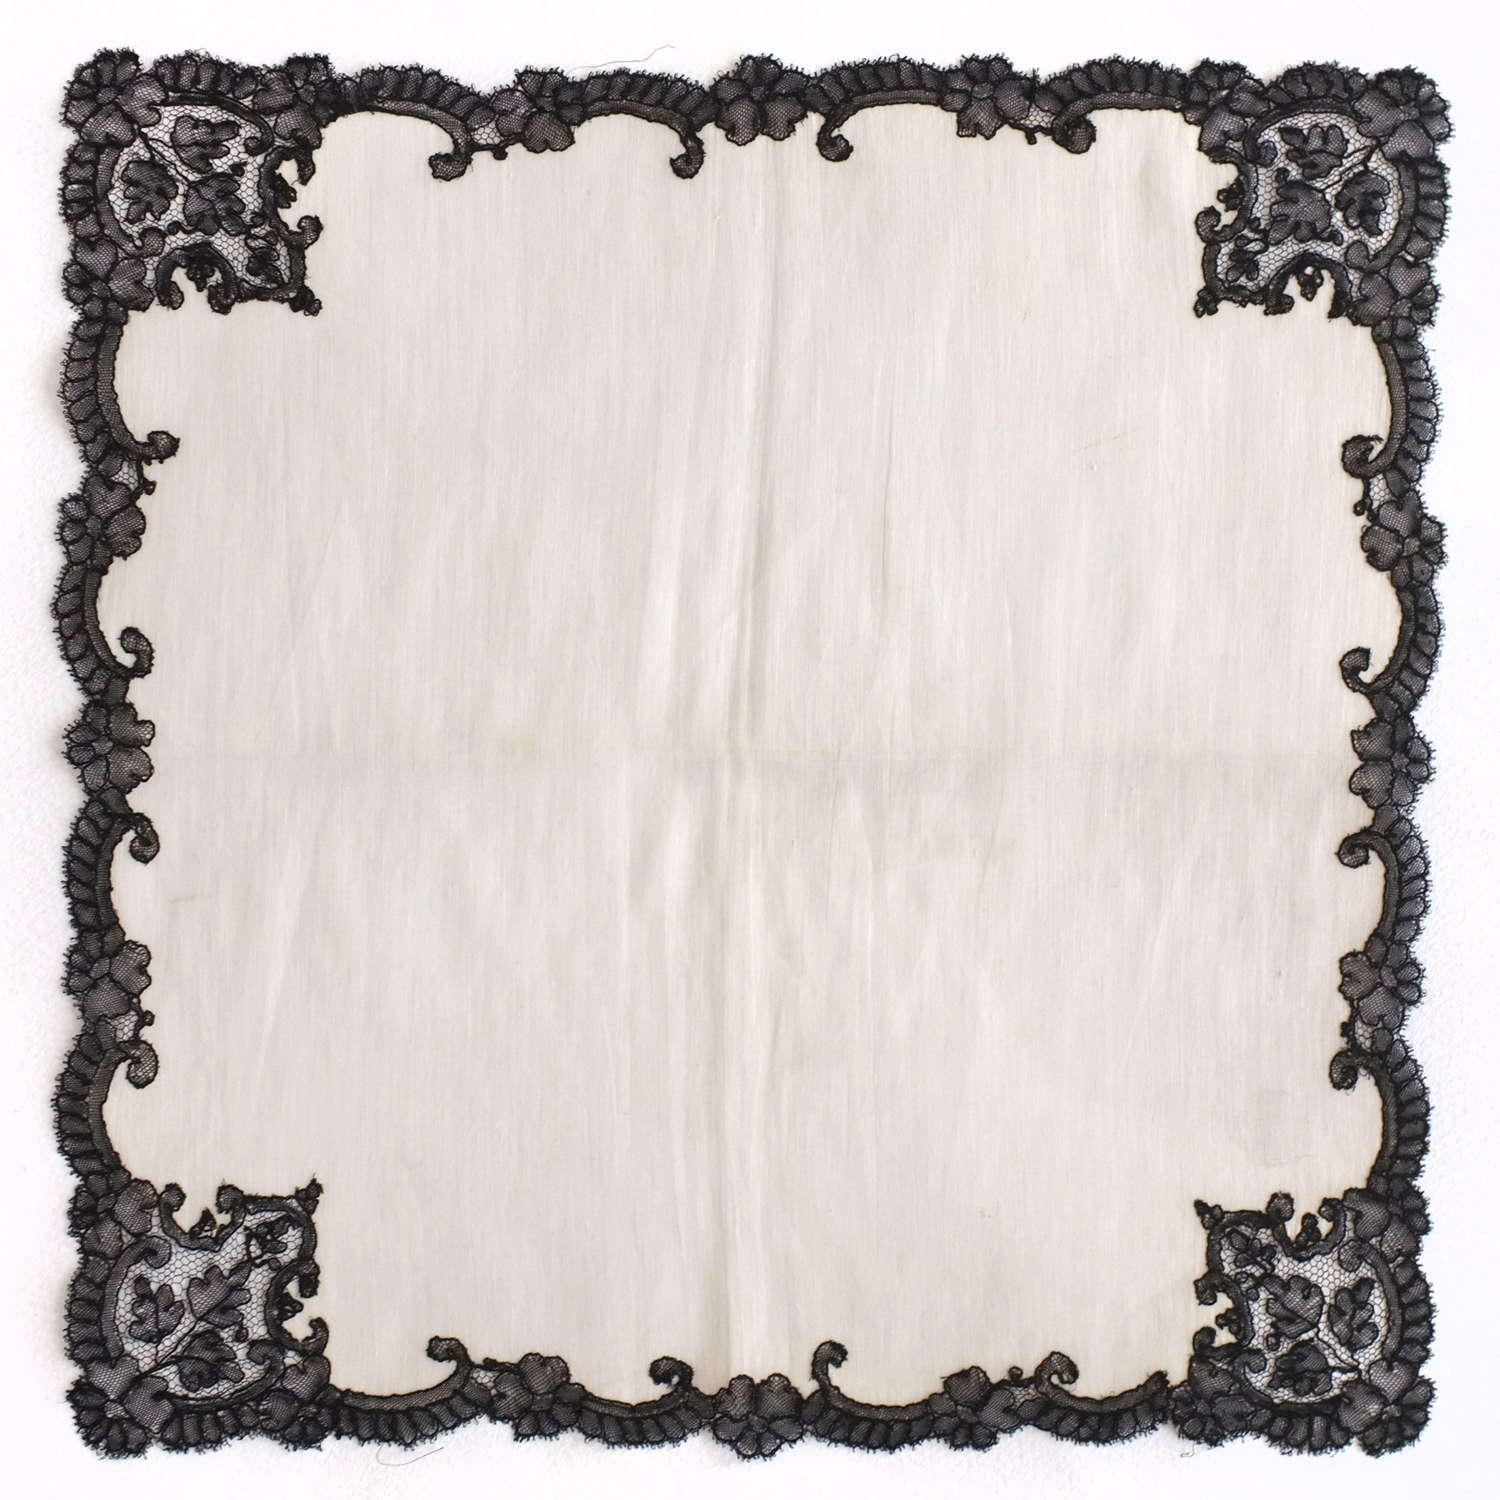 Antique 19th Century Mourning Handkerchief with Black Lace Border